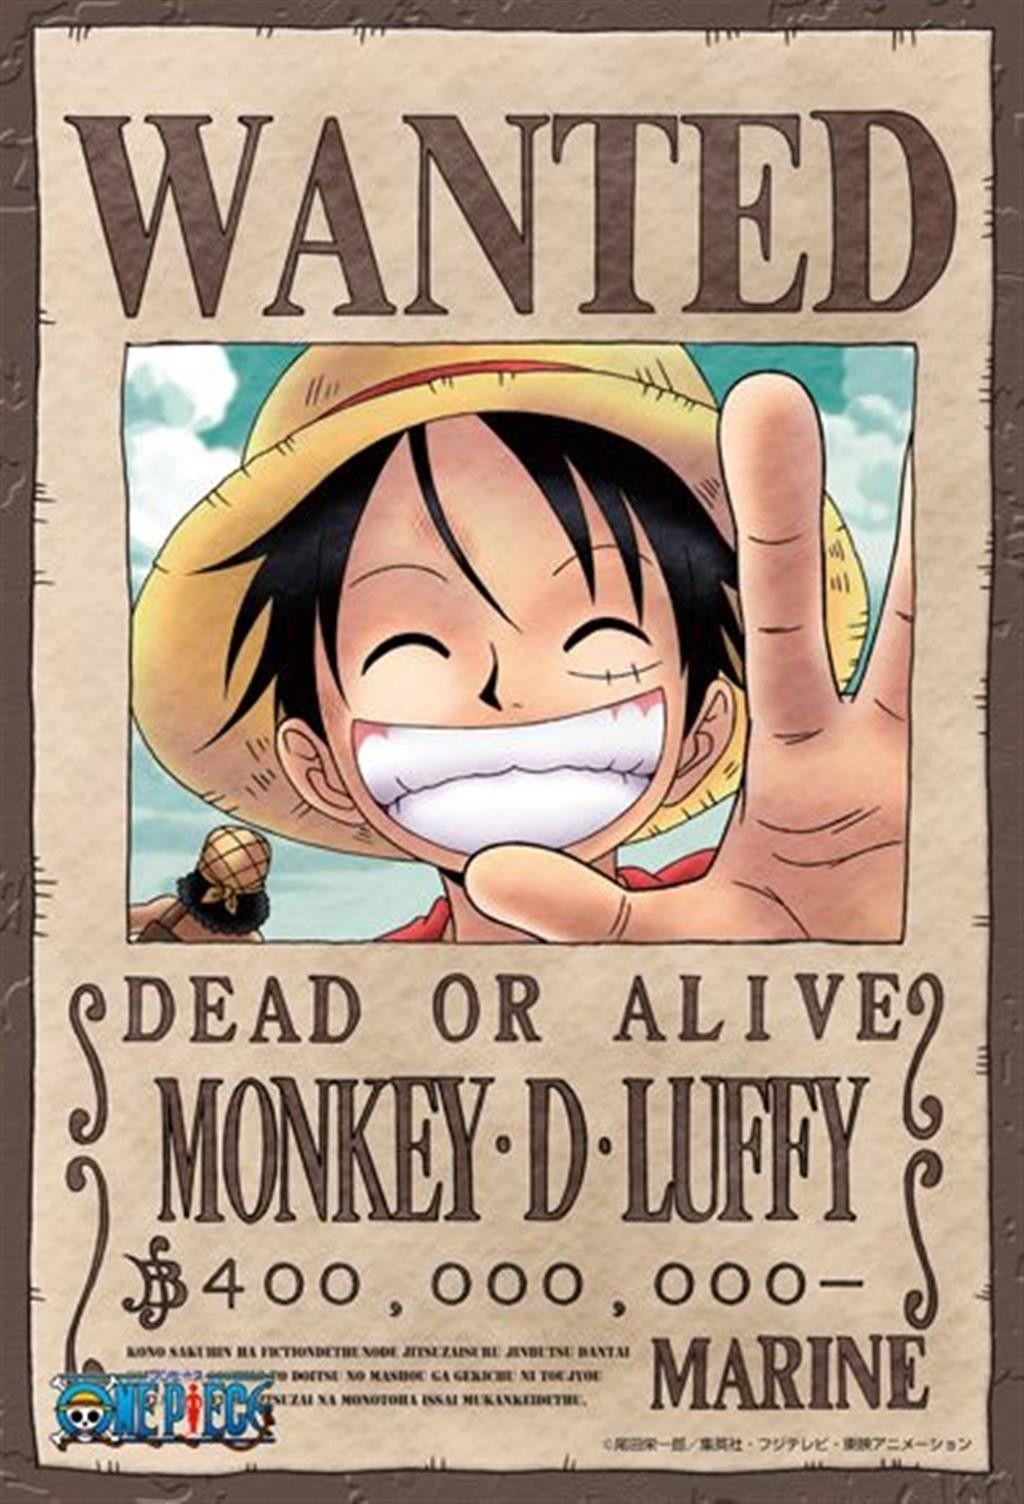 Luffy One Piece Wanted Poster Picture. One piece japan, One piece luffy, One piece bounties